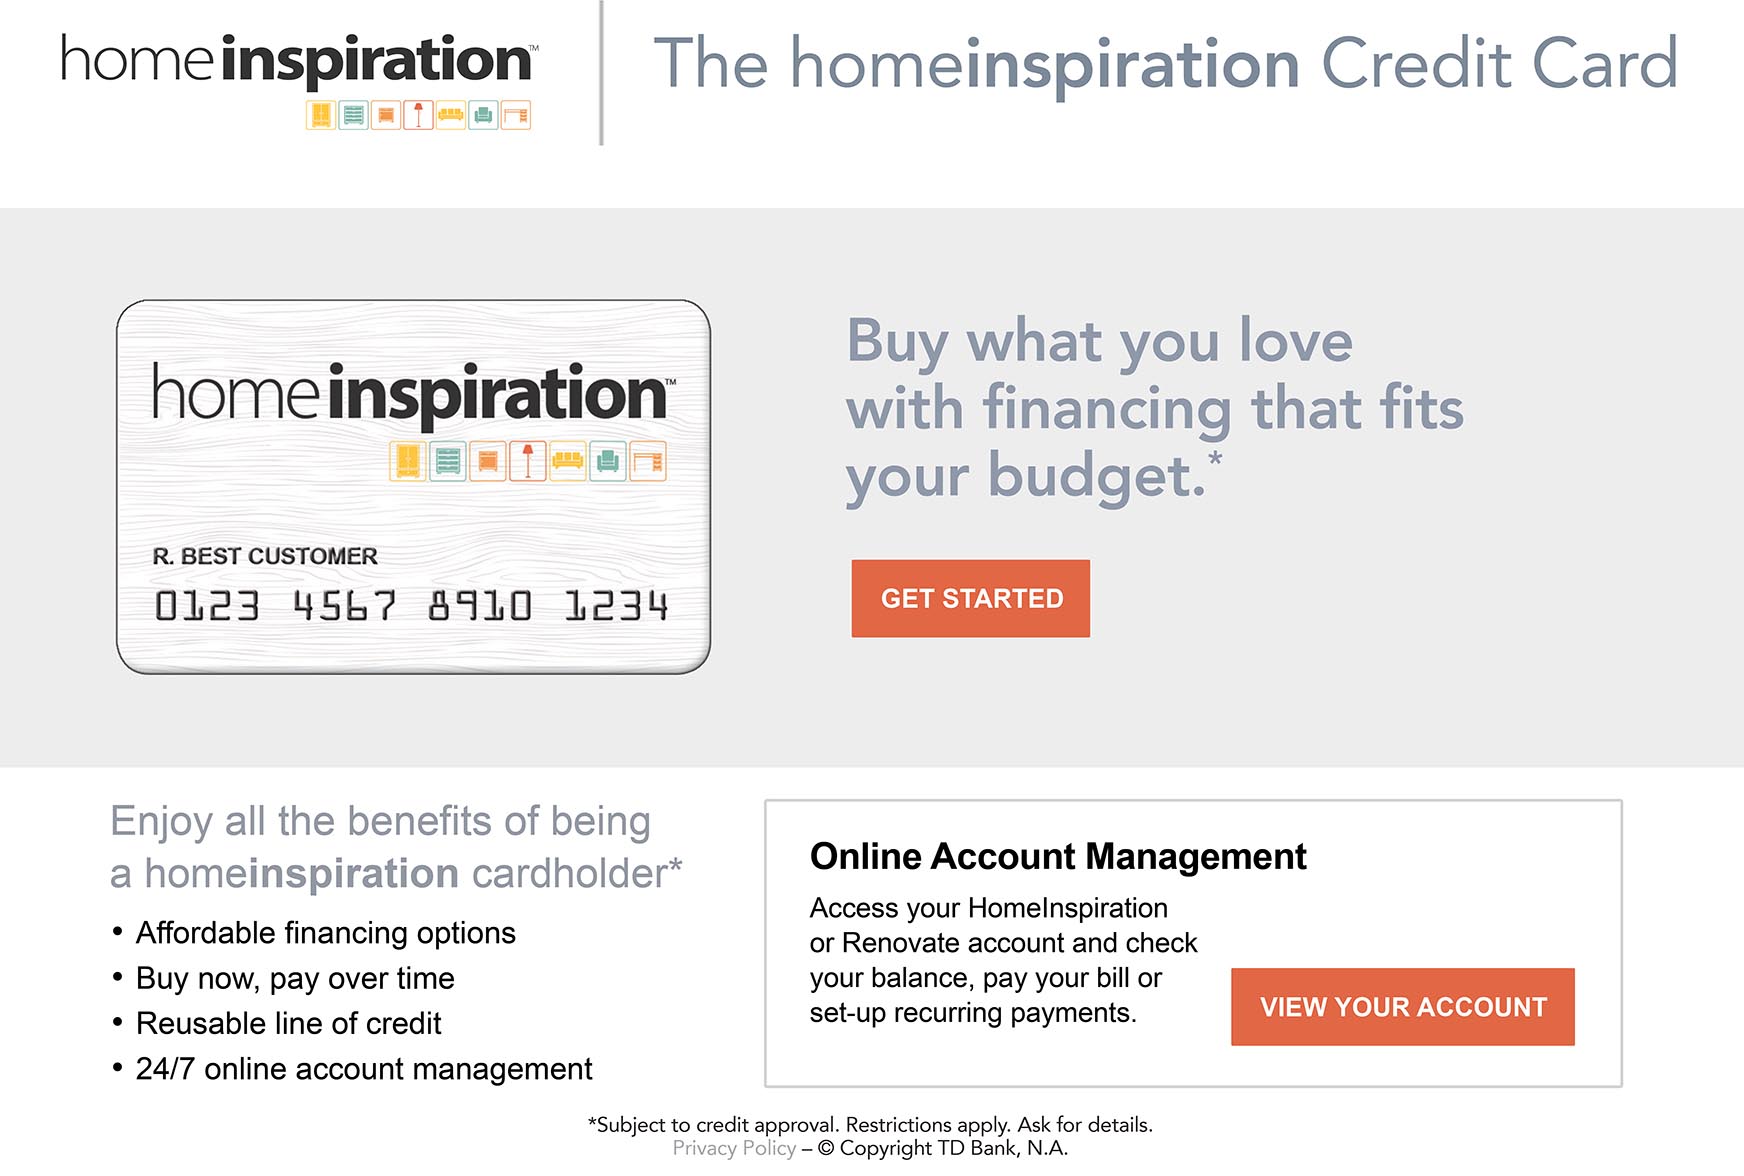 The Home Inspiration Credit Card. Buy what you love with financing that fits your budget.